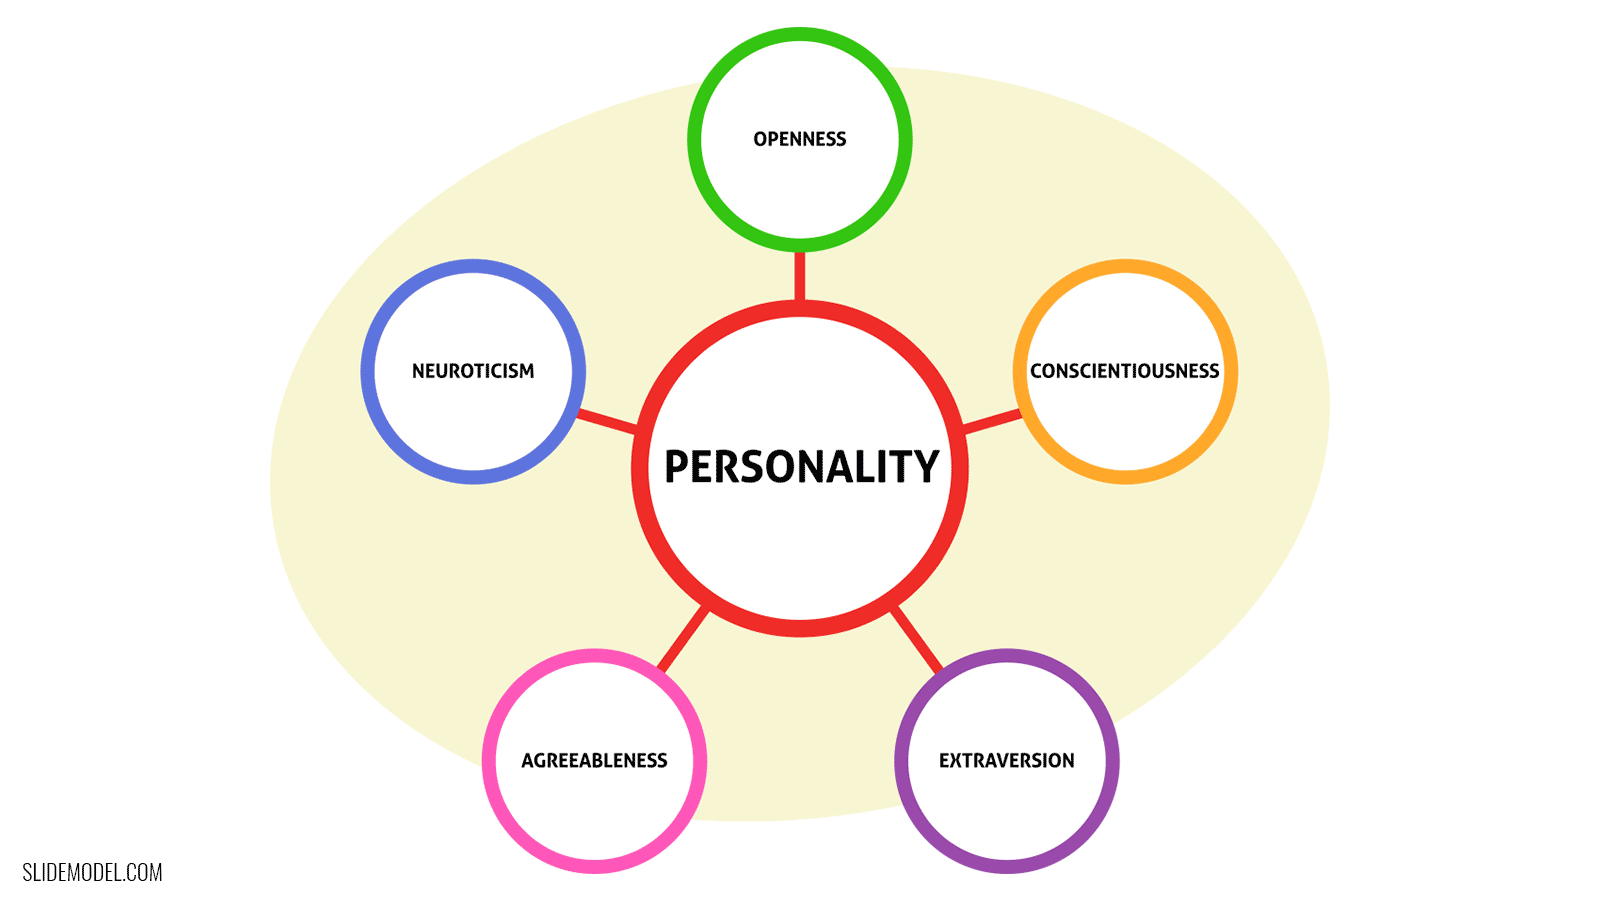 The Big Five Personality Traits Model